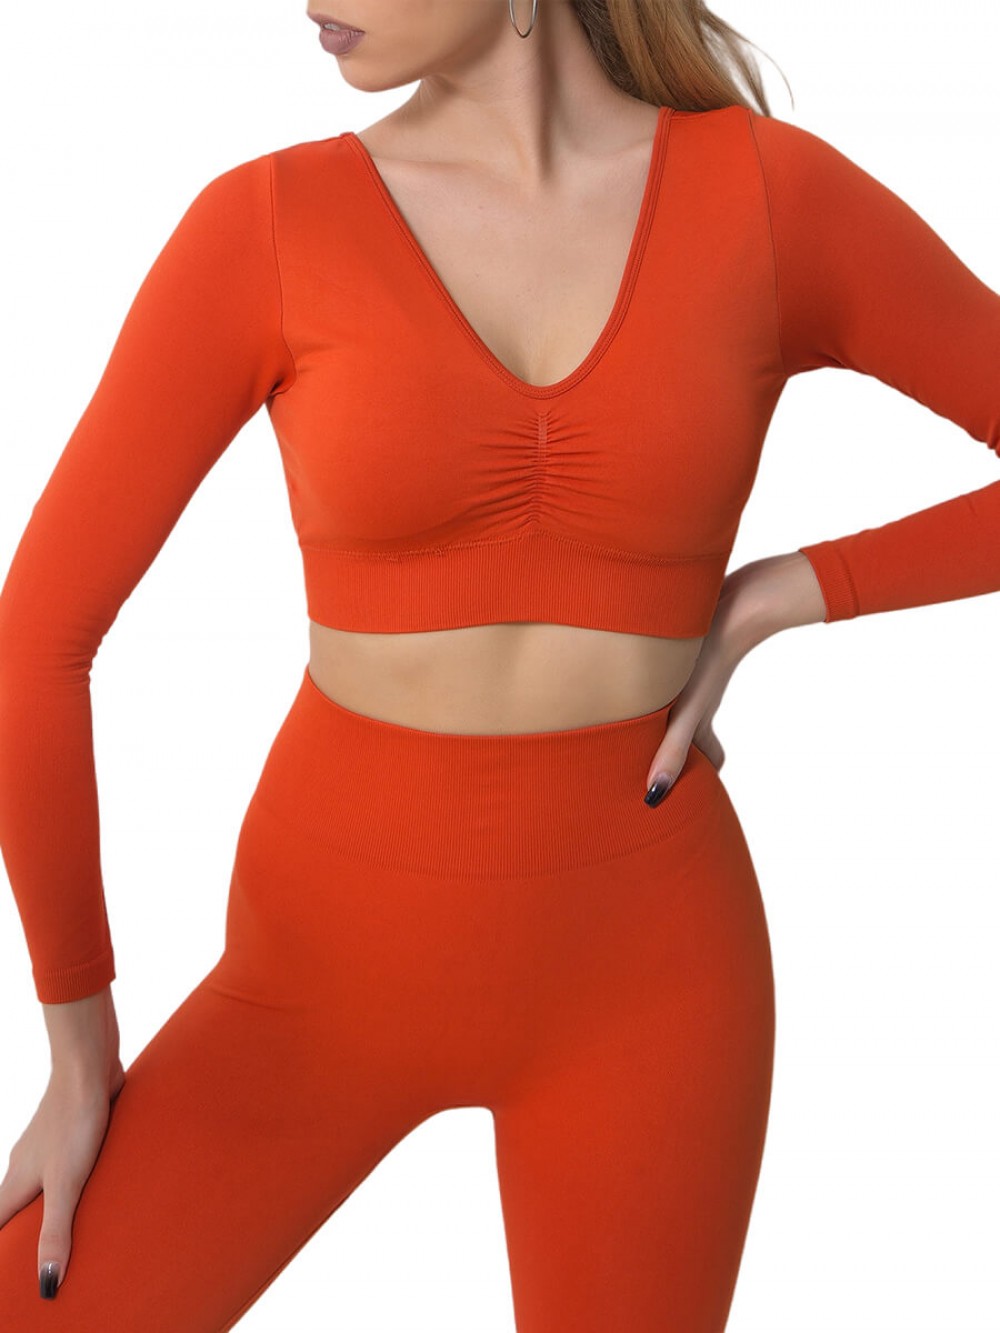 Red Seamless Stylish Ultra Stretchy Workout Activewear